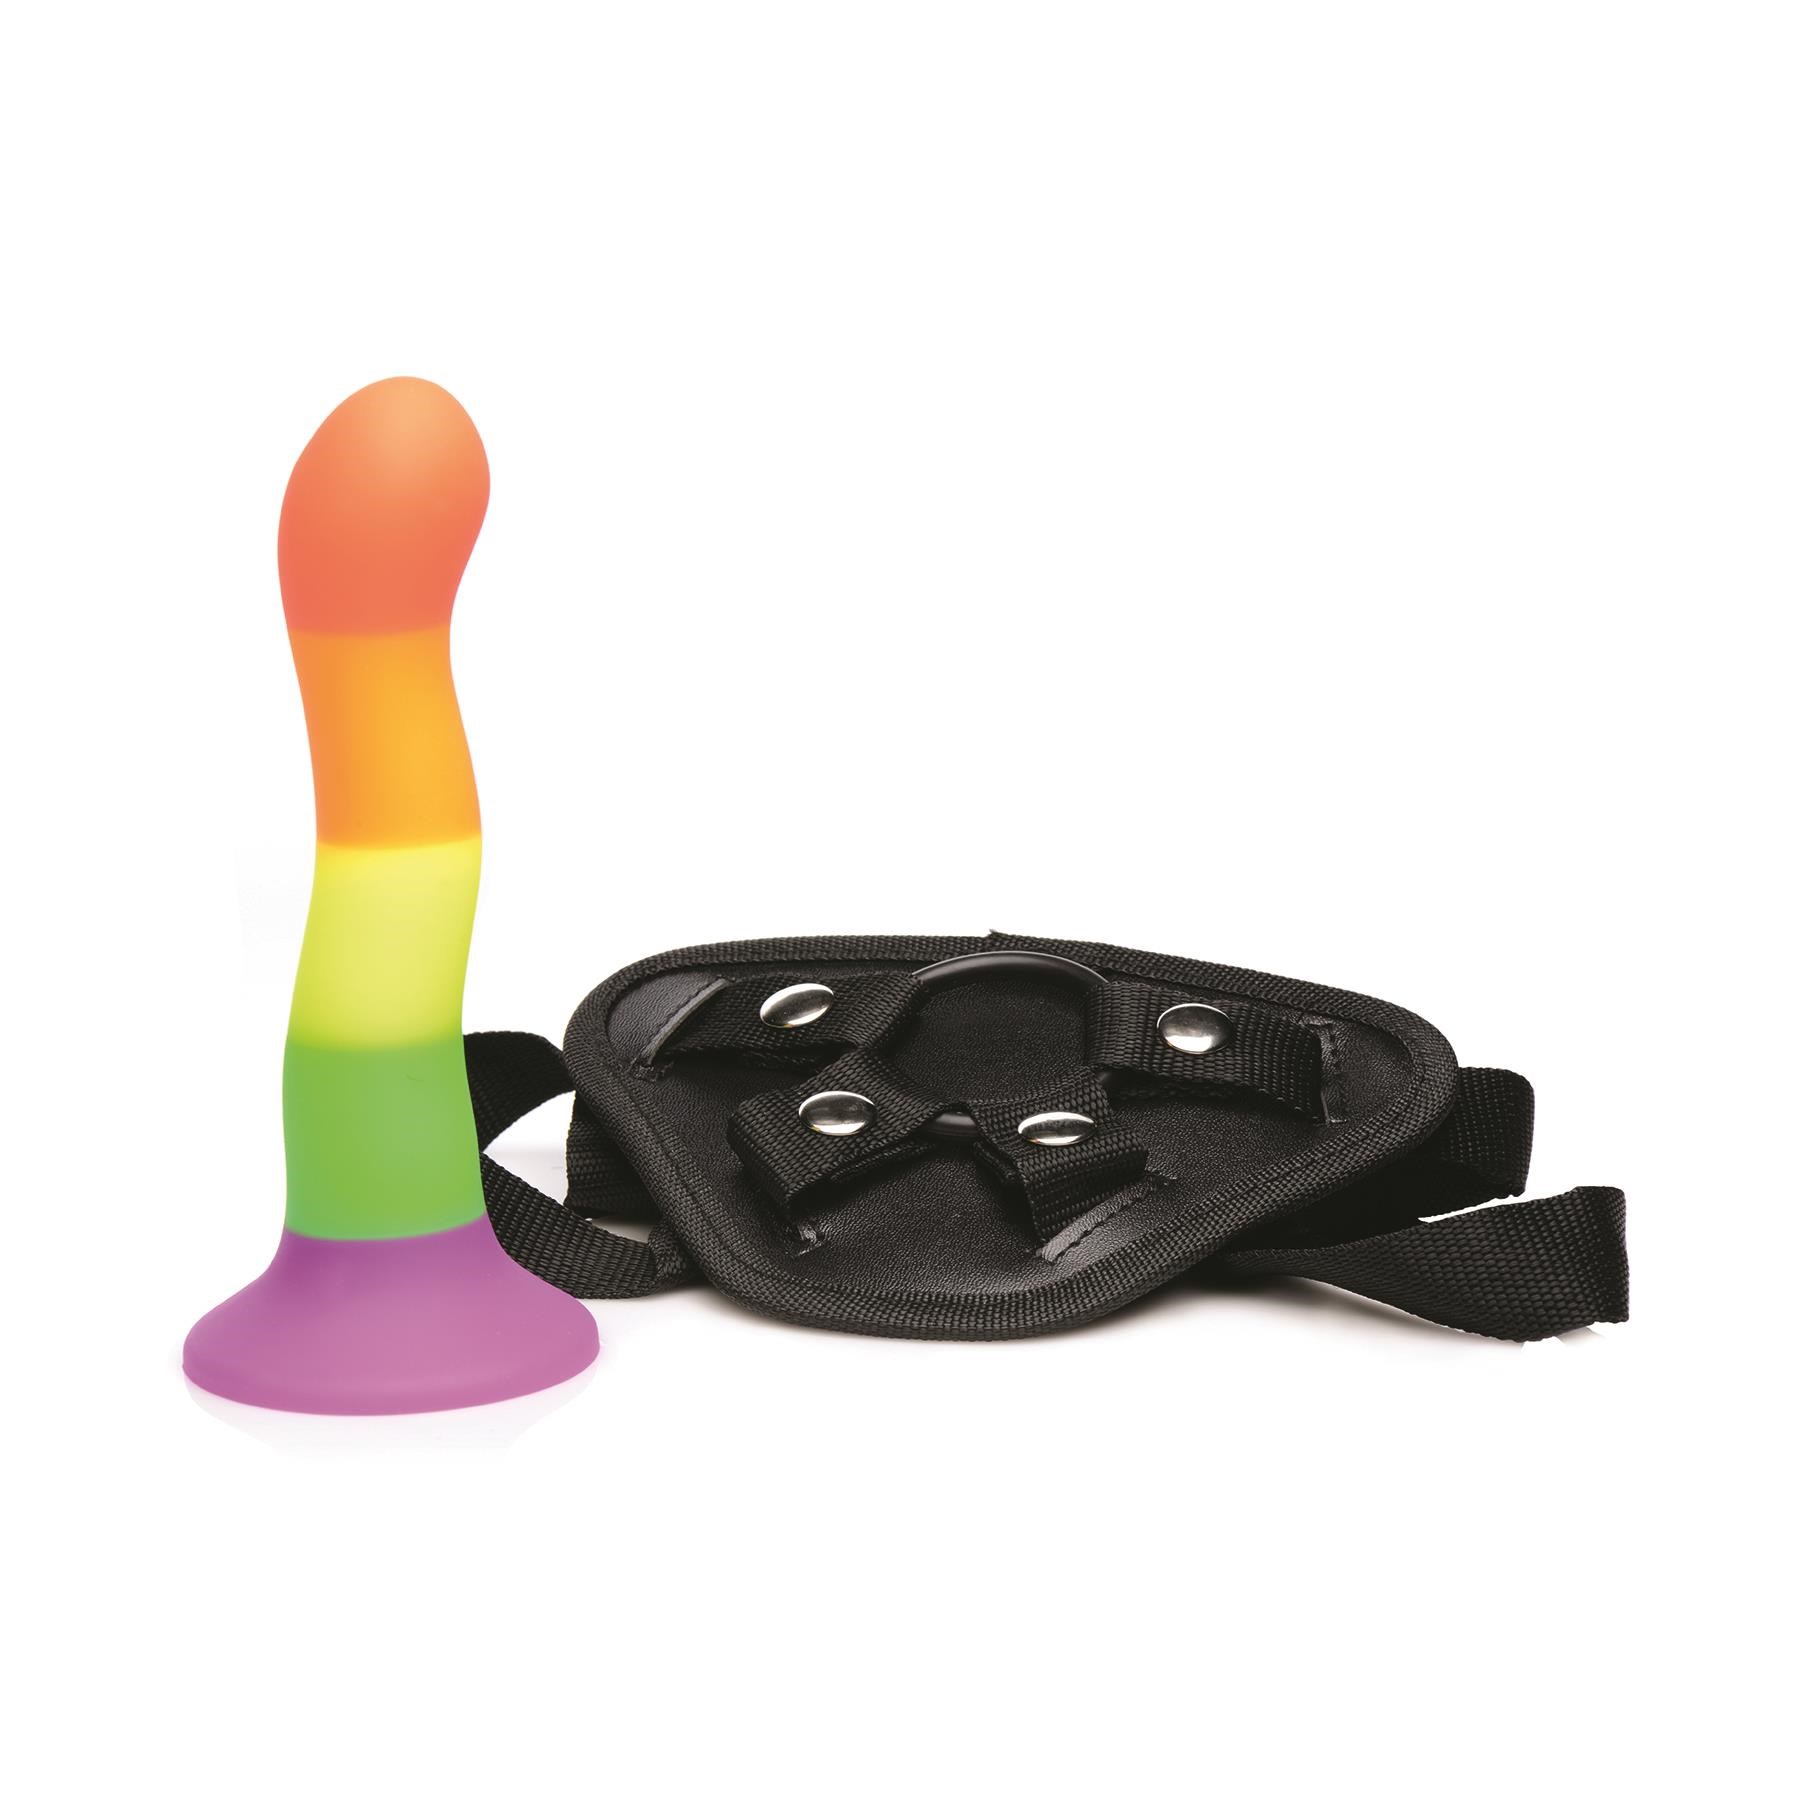 Proud Rainbow Silicone Dildo With Harness - Product Shot